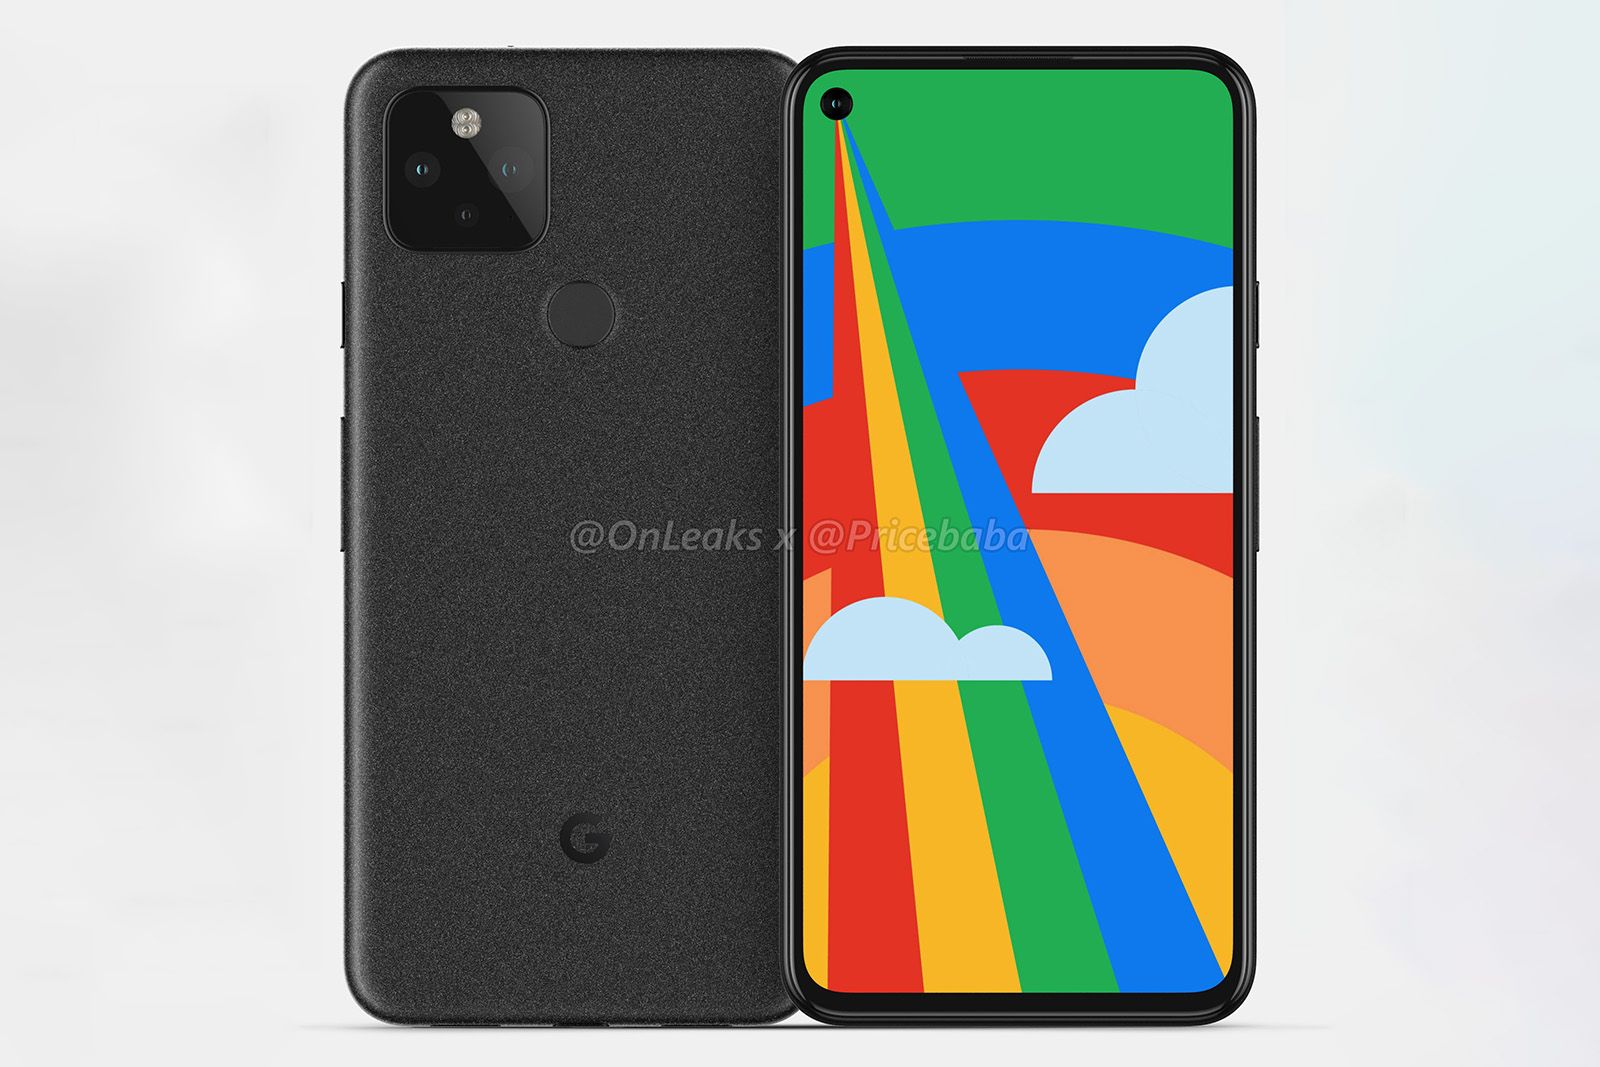 Pixel 5 price leaks suggests another affordable Google phone photo 1